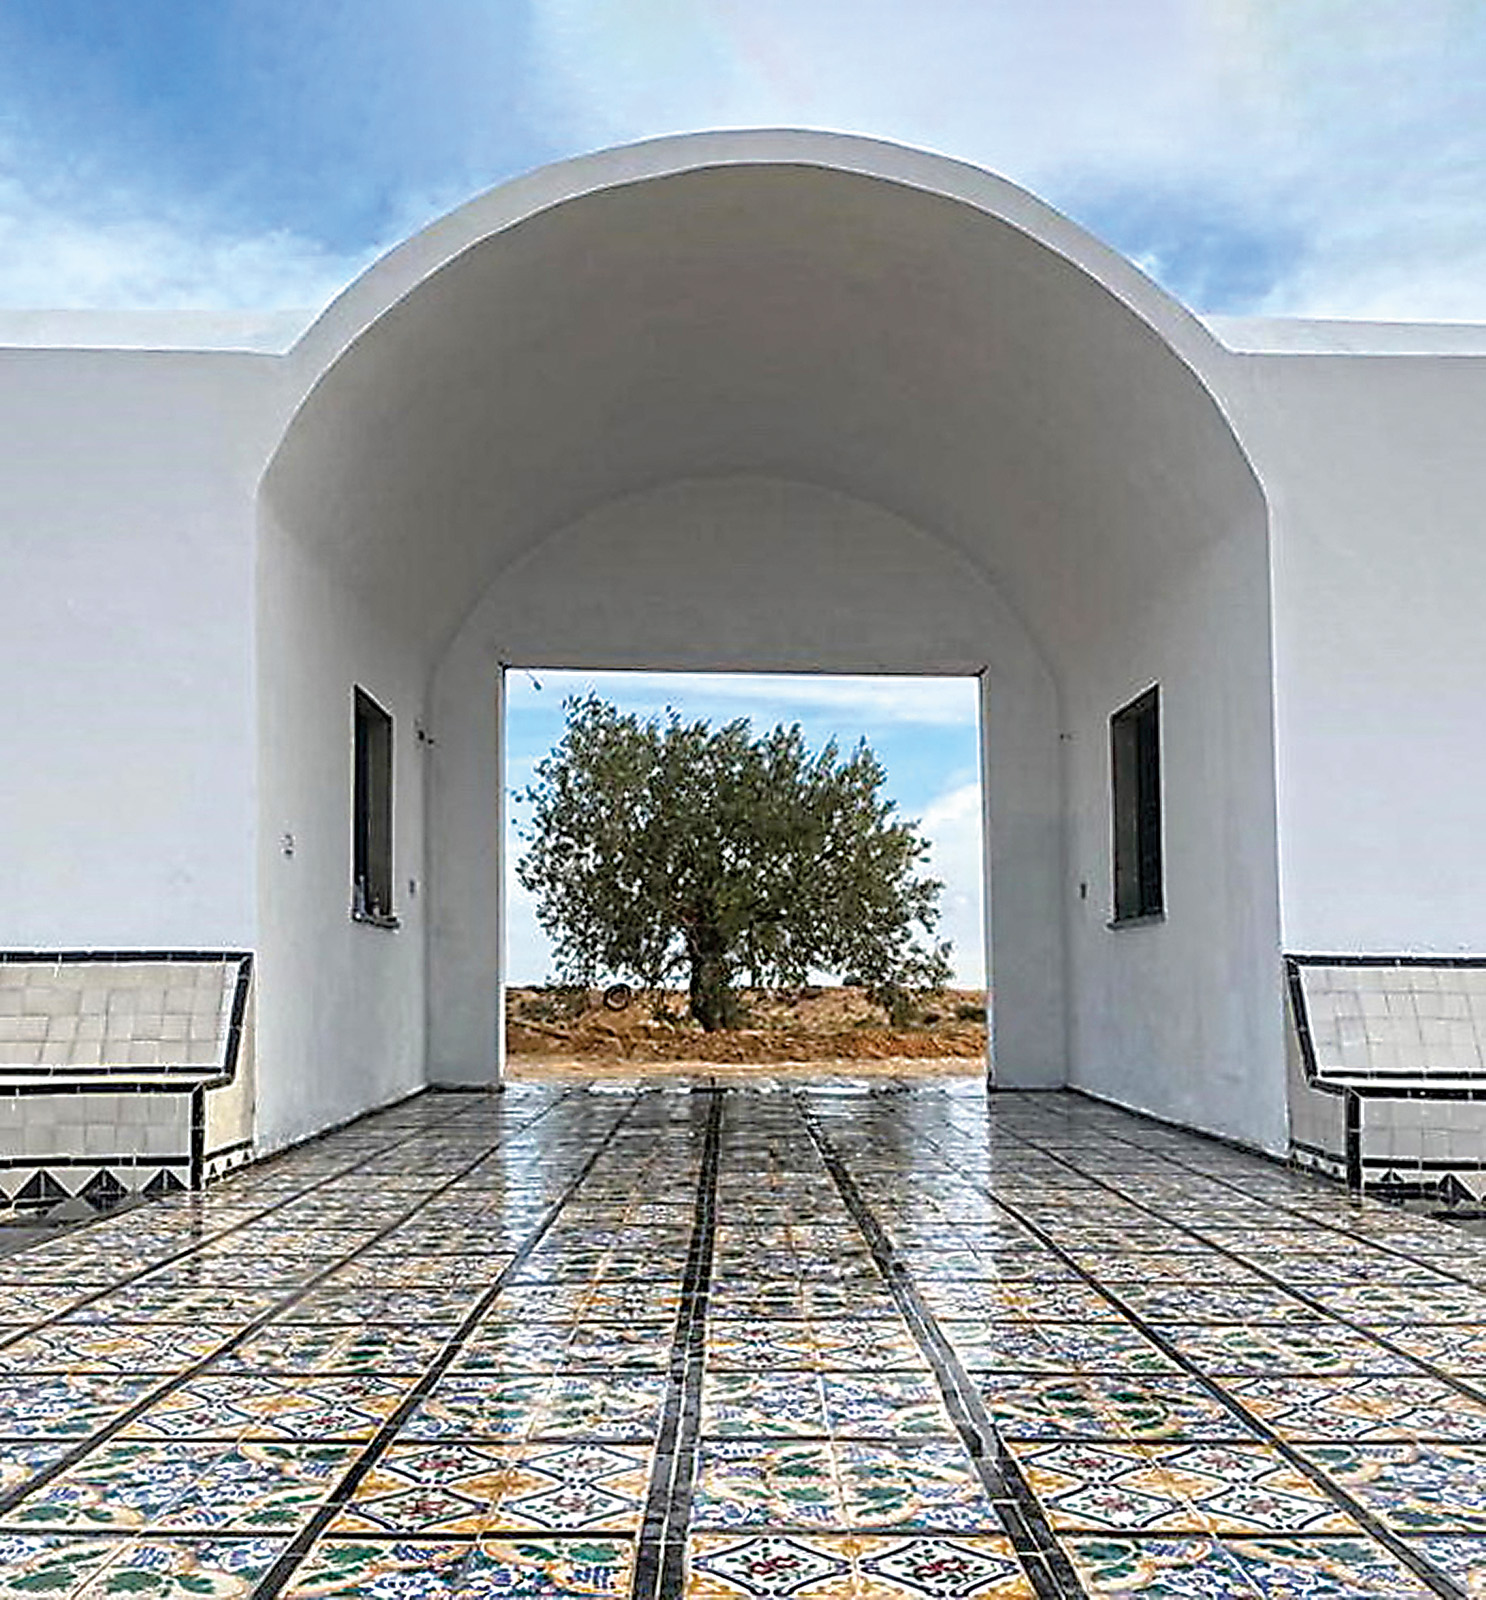 Paths tiled with designs from the renowned Tunisian craft town of Nabeul lead through the cemetery, where a portal frames one of five olive trees that represent the five pillars of Islam. 